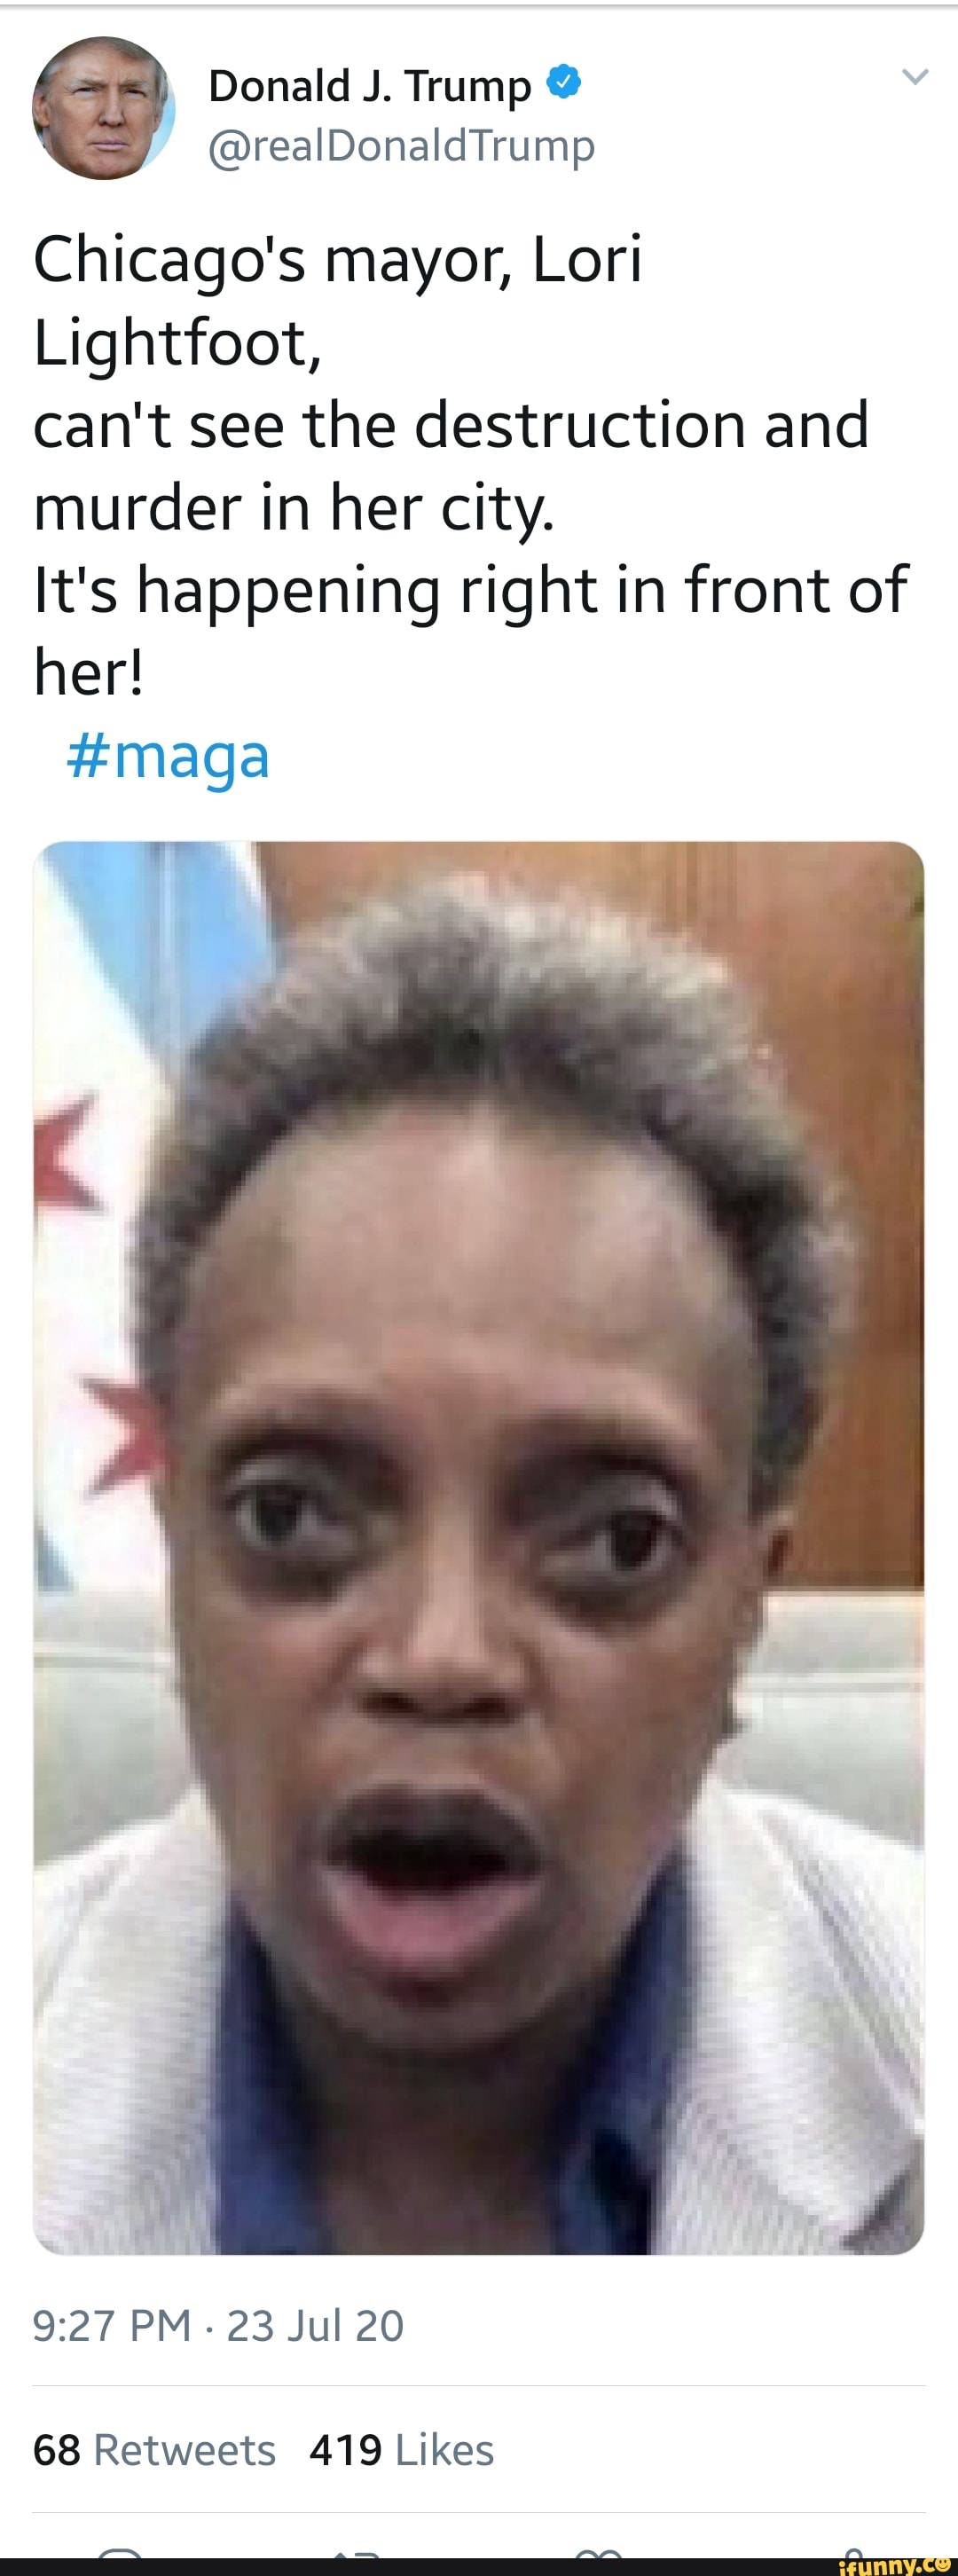 Chicago's mayor, Lori Lightfoot, can't see the destruction and murder